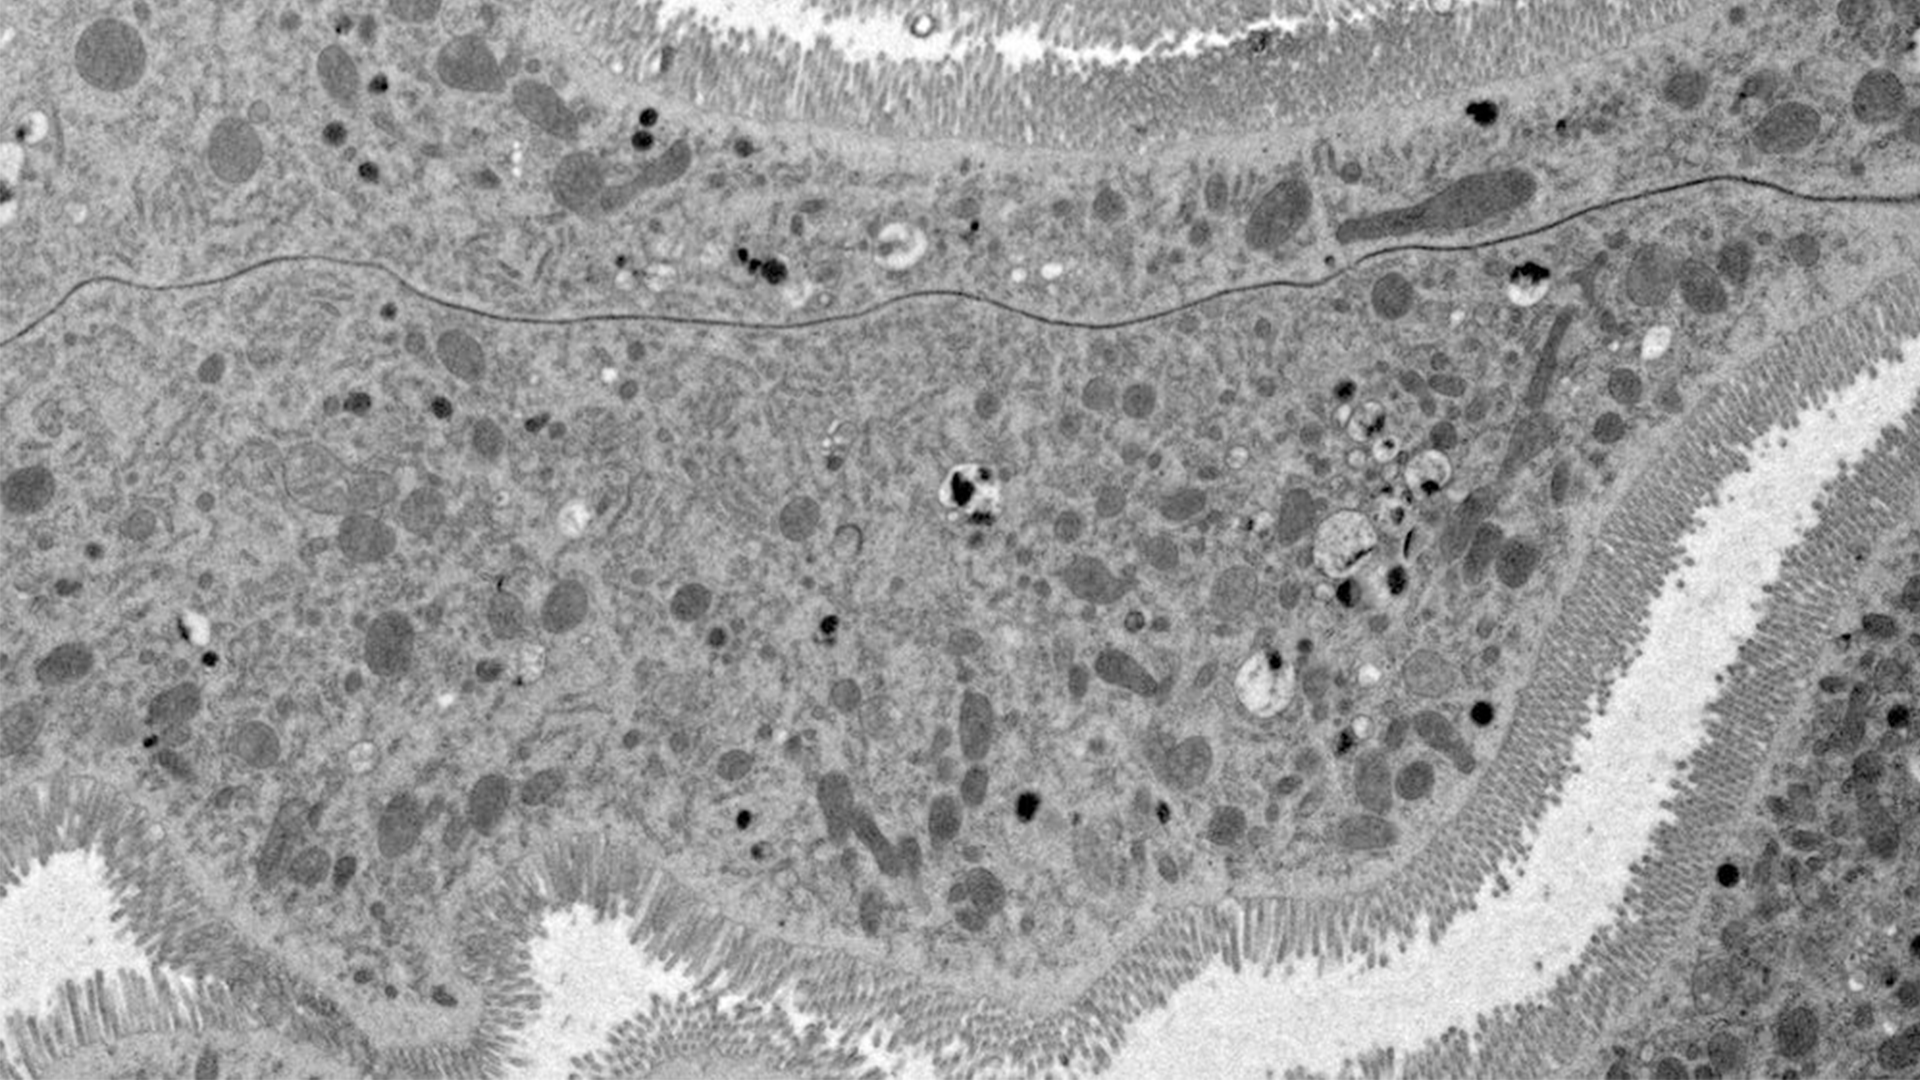 Overview of Drosophila gastric caeca and a mitochondrion with well-defined cristae and well-preserved surrounding membranes. Micrographs courtesy of Dr. Syed (NIH/NIDCR) and Dr. Bleck (NIH/NHLBI) 